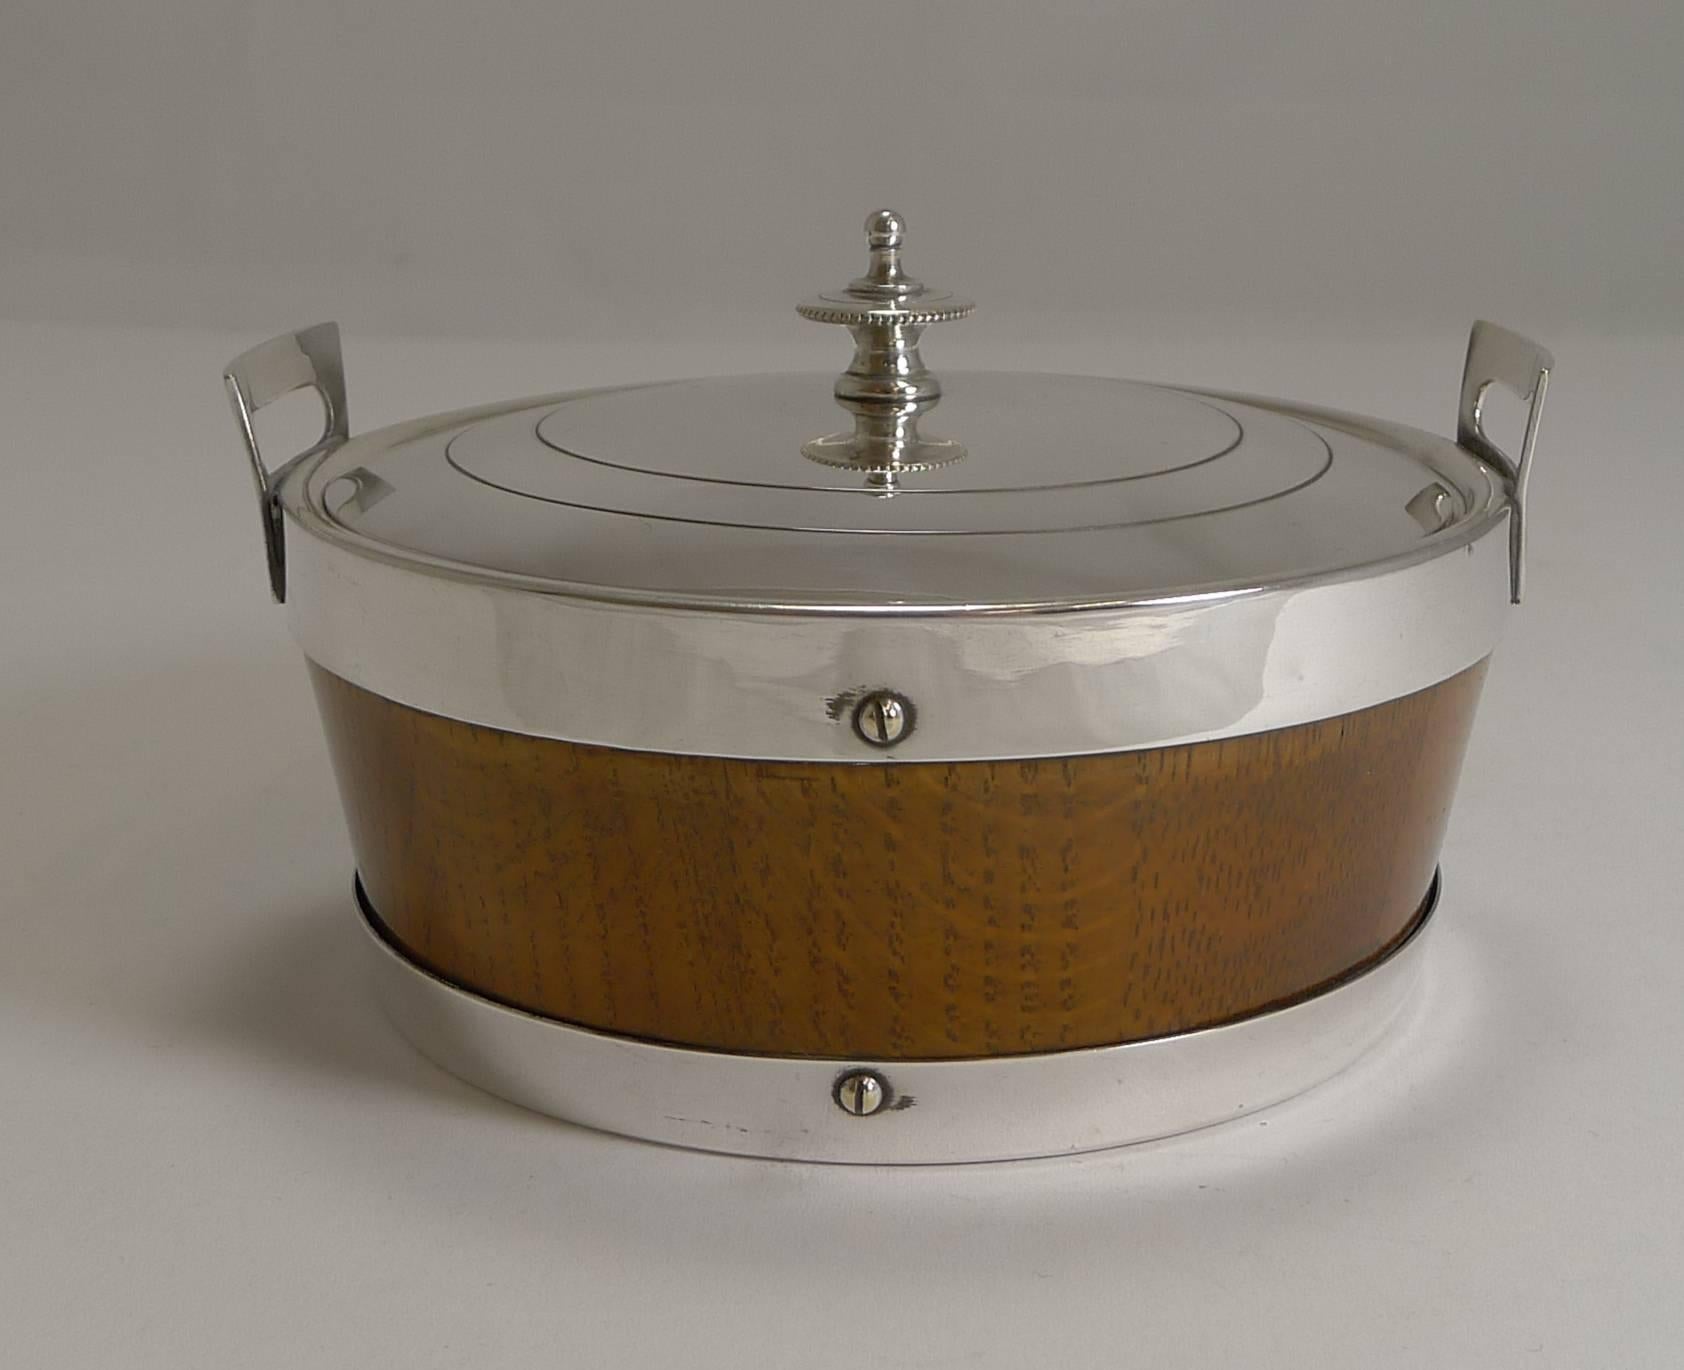 A handsome late Victorian butter dish in the winning combination of solid English oak with silver plated mounts.

The lid lifts to reveal the original cream ware ceramic liner which of course is removable, The underside of the lid marked EPNS for